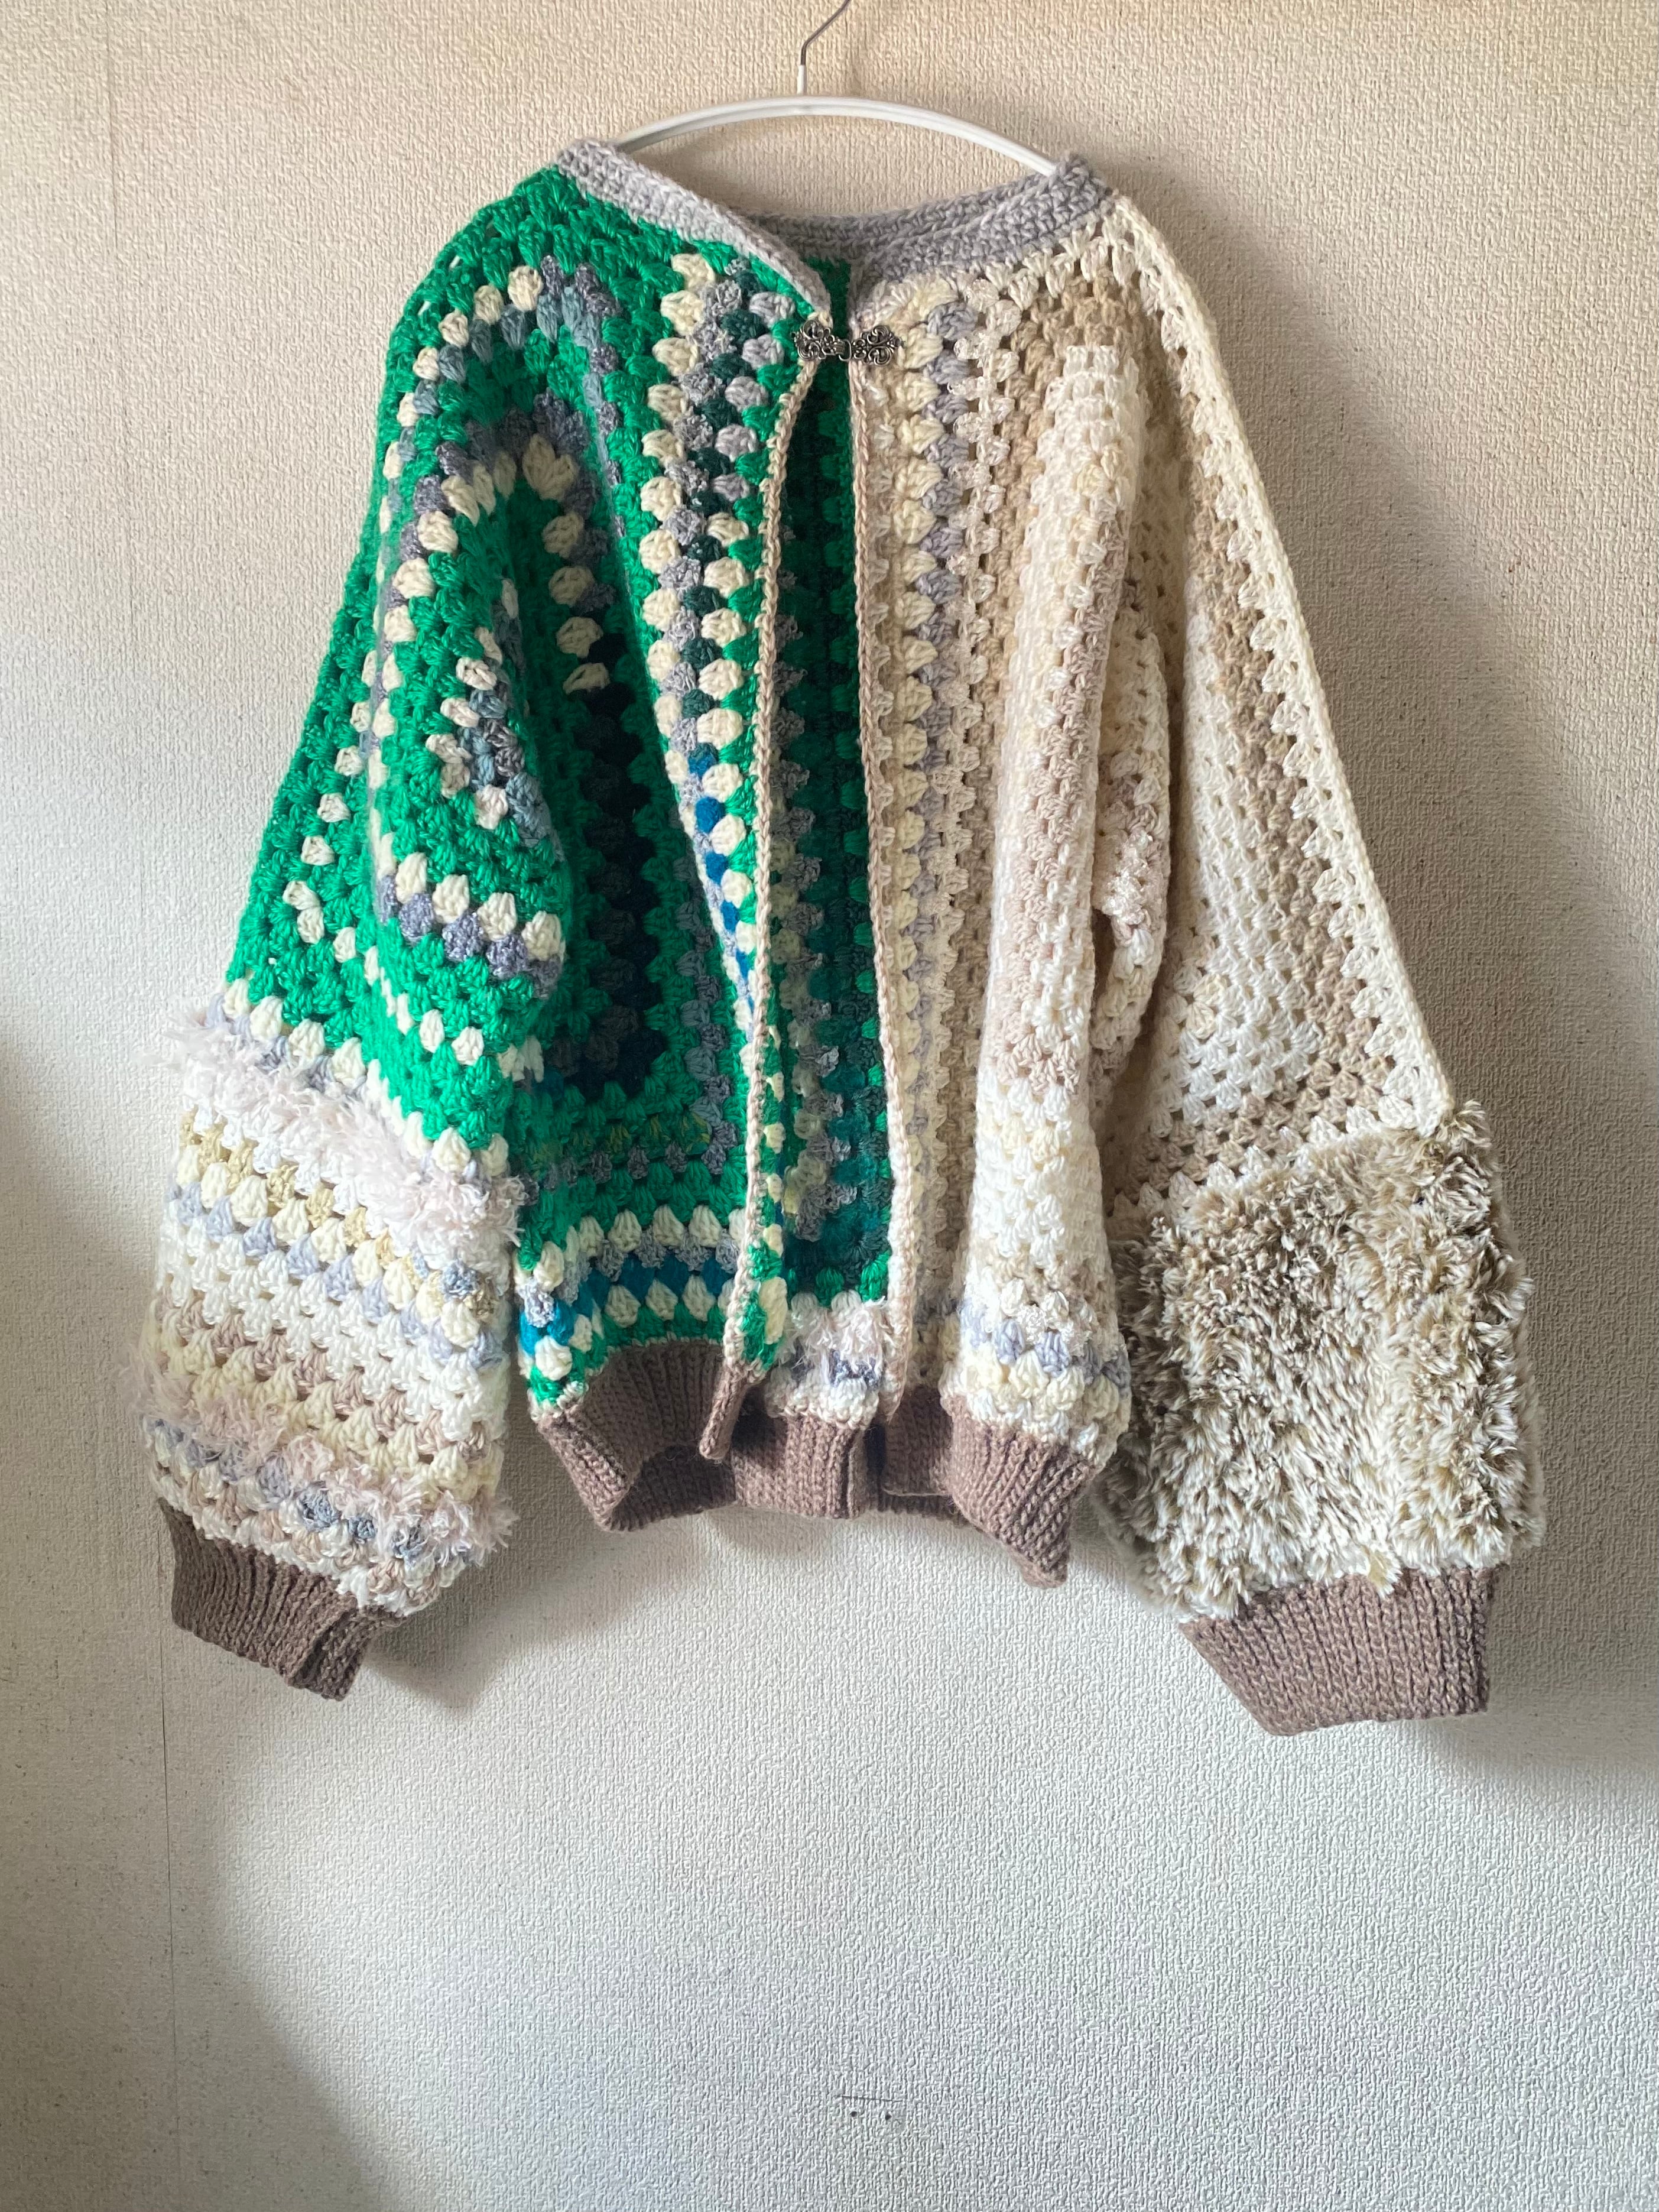 A lovely hand-knitted cardigan with a granny hexagon motif